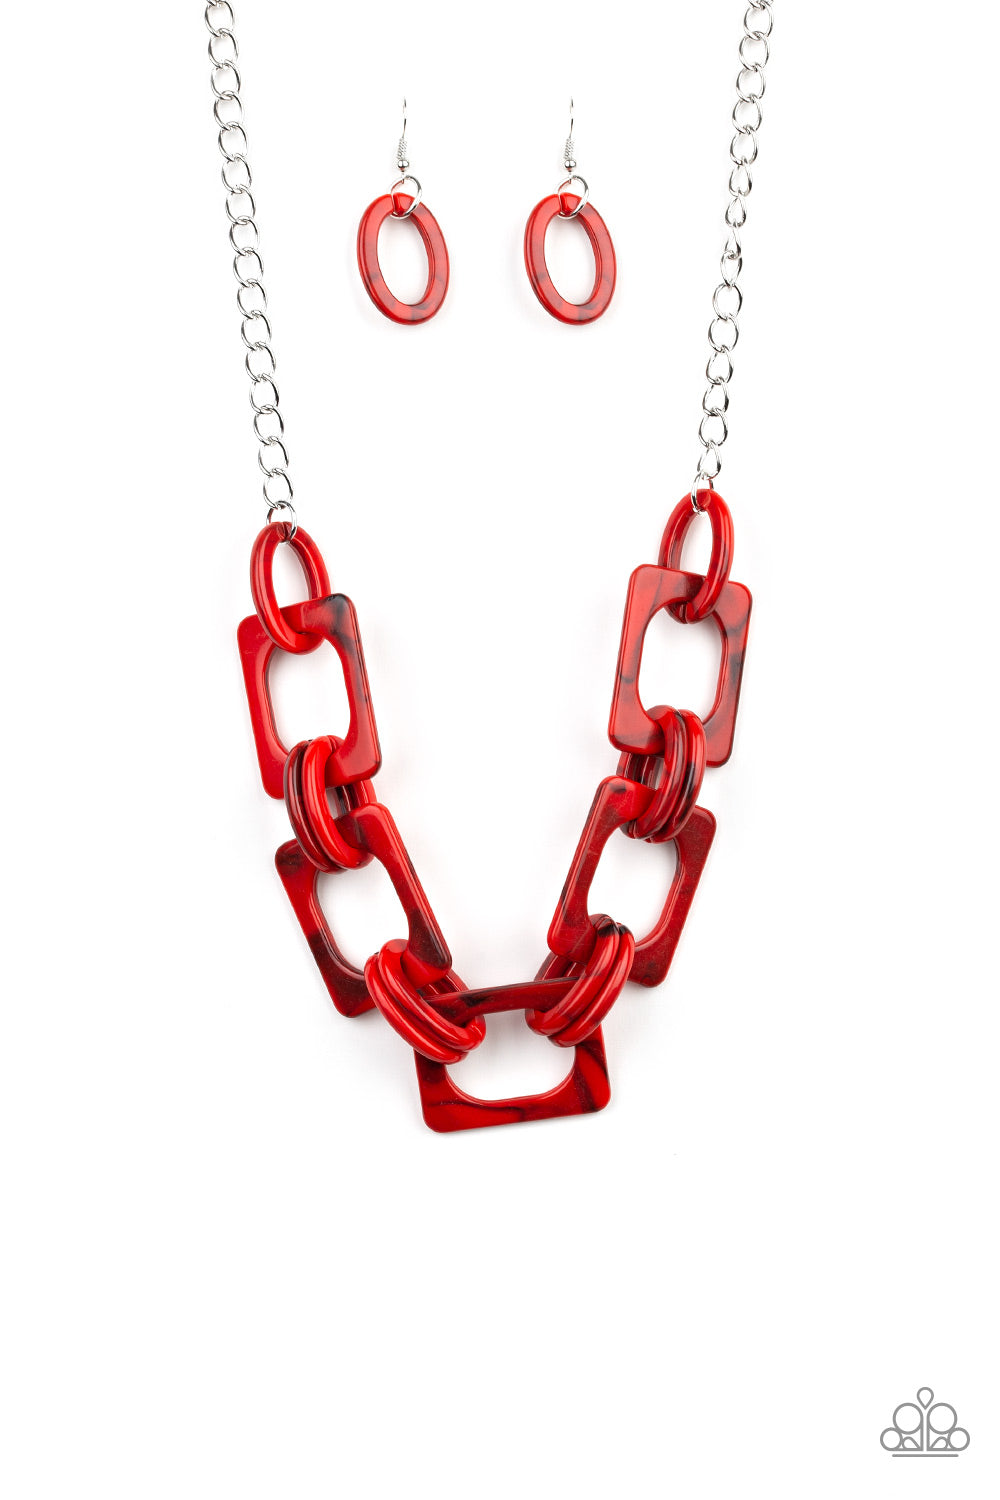 Sizzle Sizzle - Red necklace